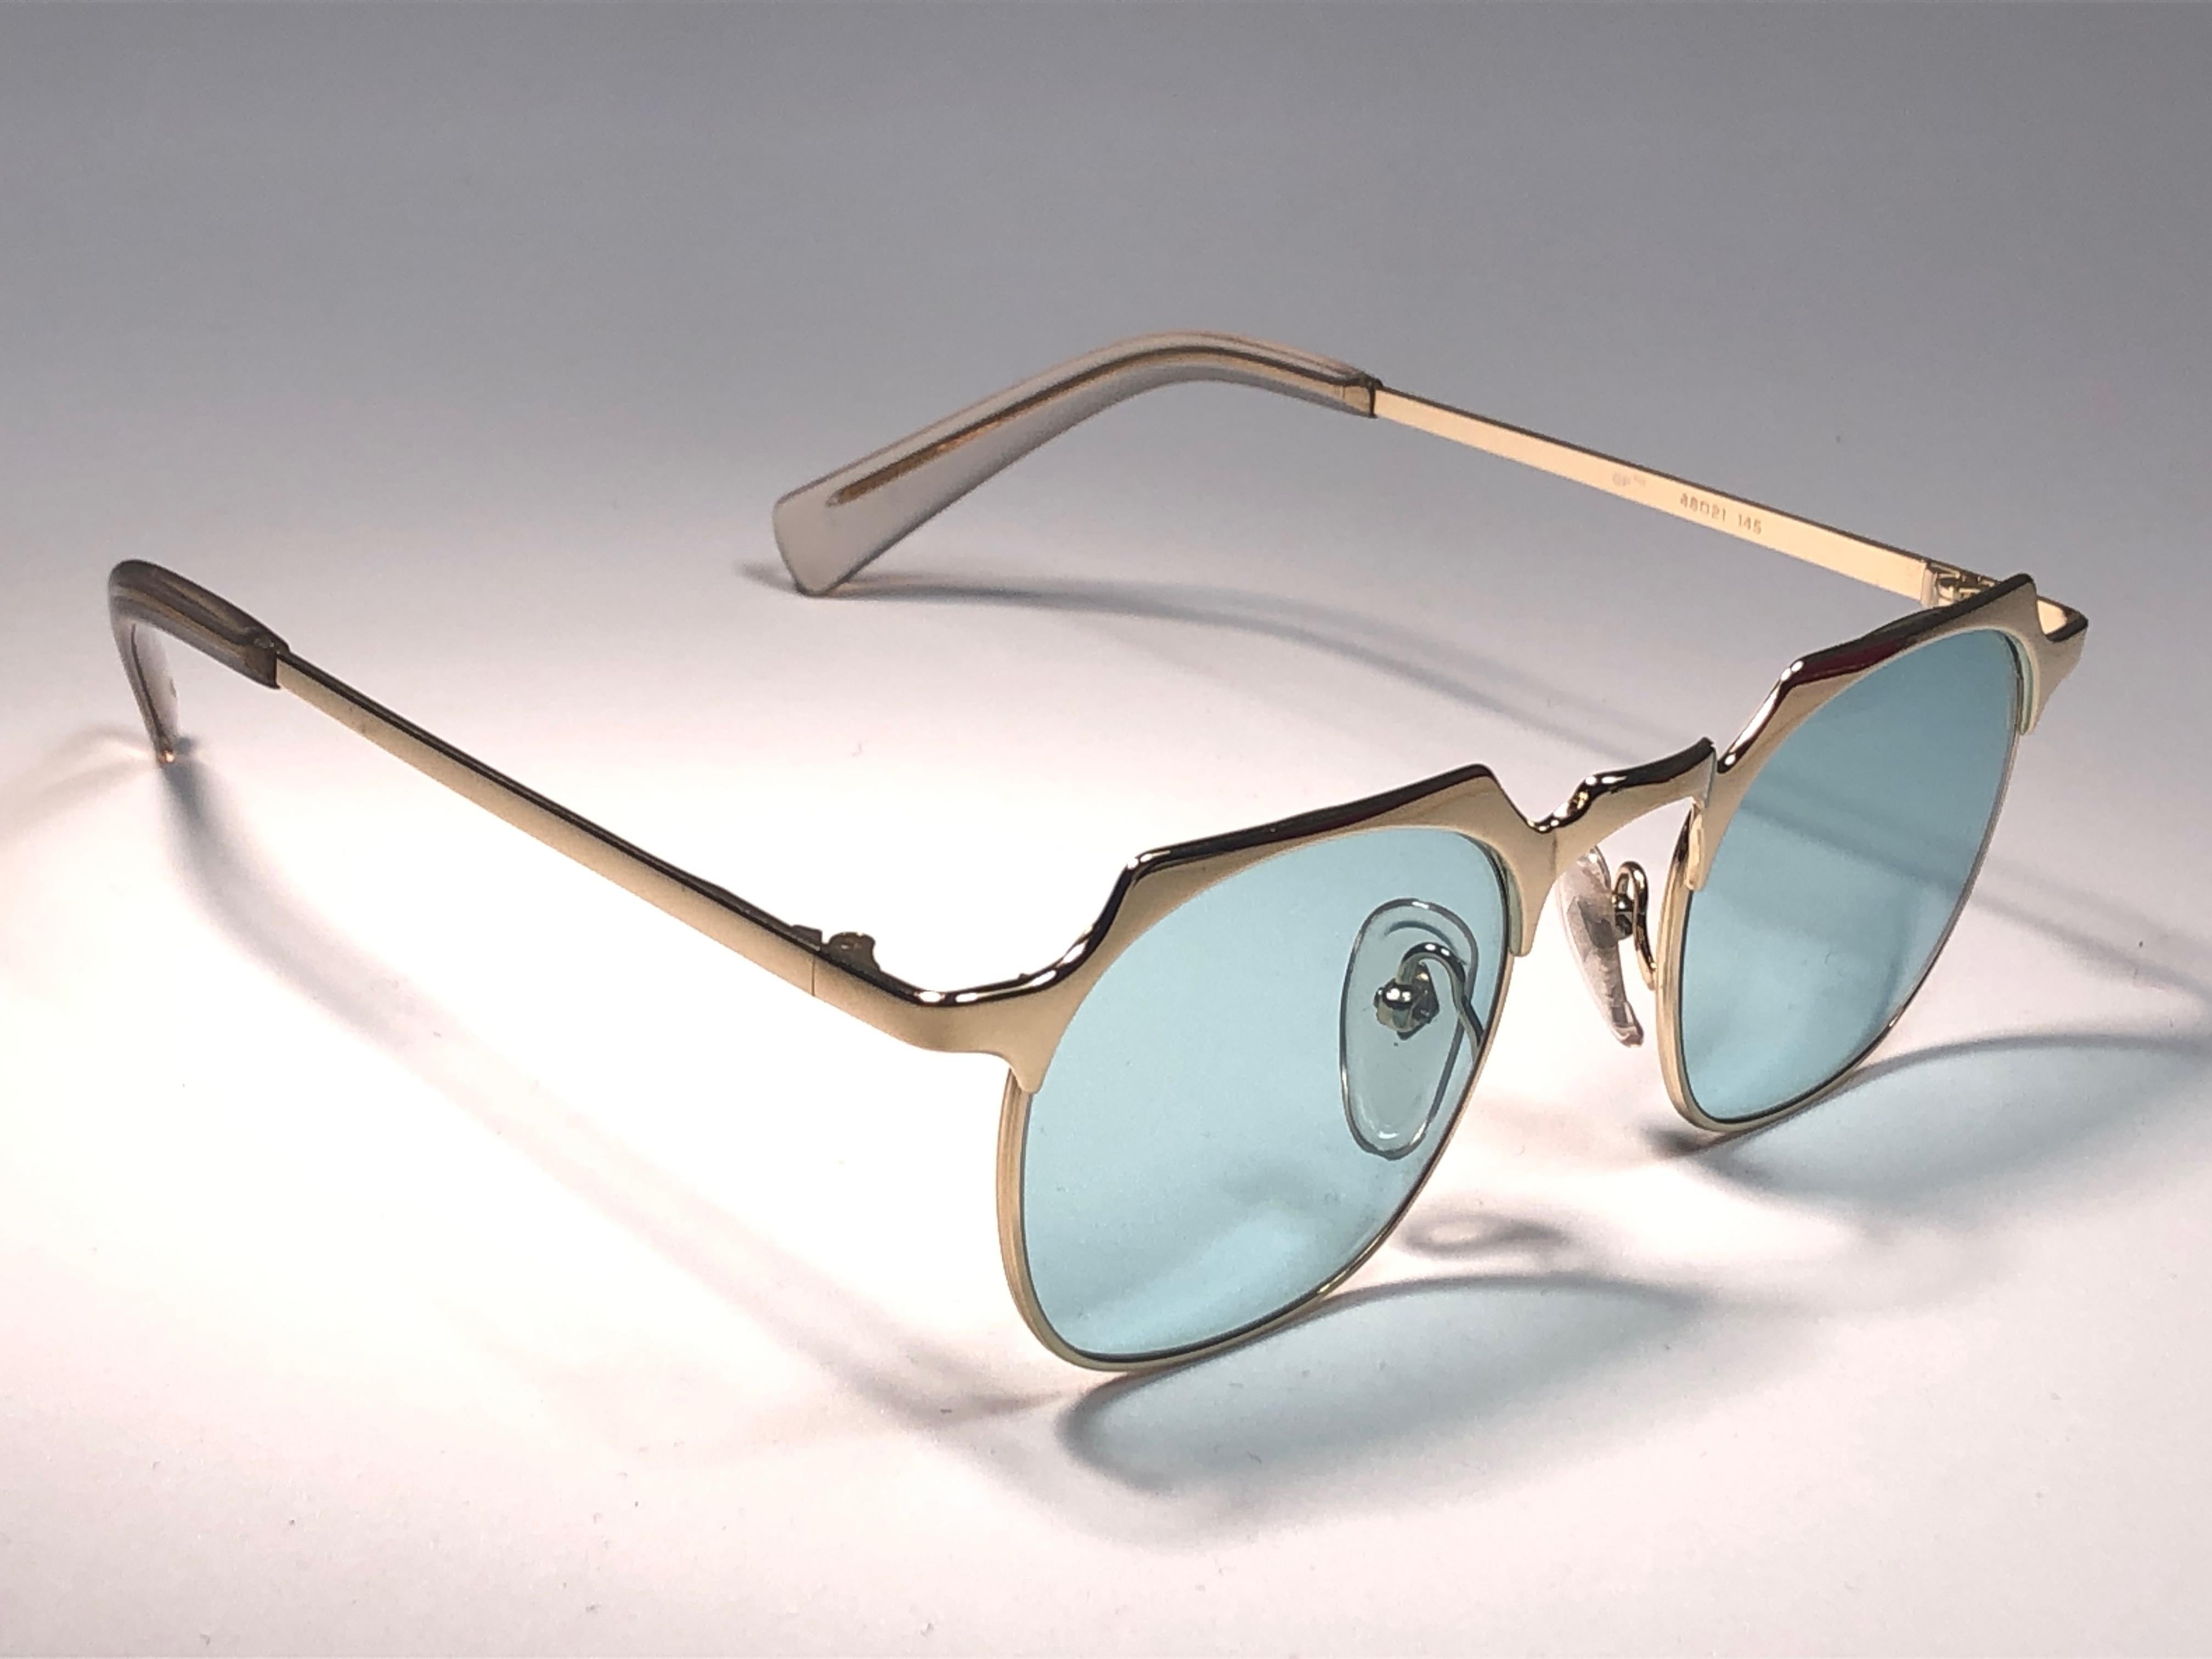 New Jean Paul Gaultier medium gold frame. 
Spotless light blue lenses that complete a ready to wear JPG look.

Amazing design with strong yet intricate details.
Design and produced in the 1990's.
New, never worn or displayed.
This item may show